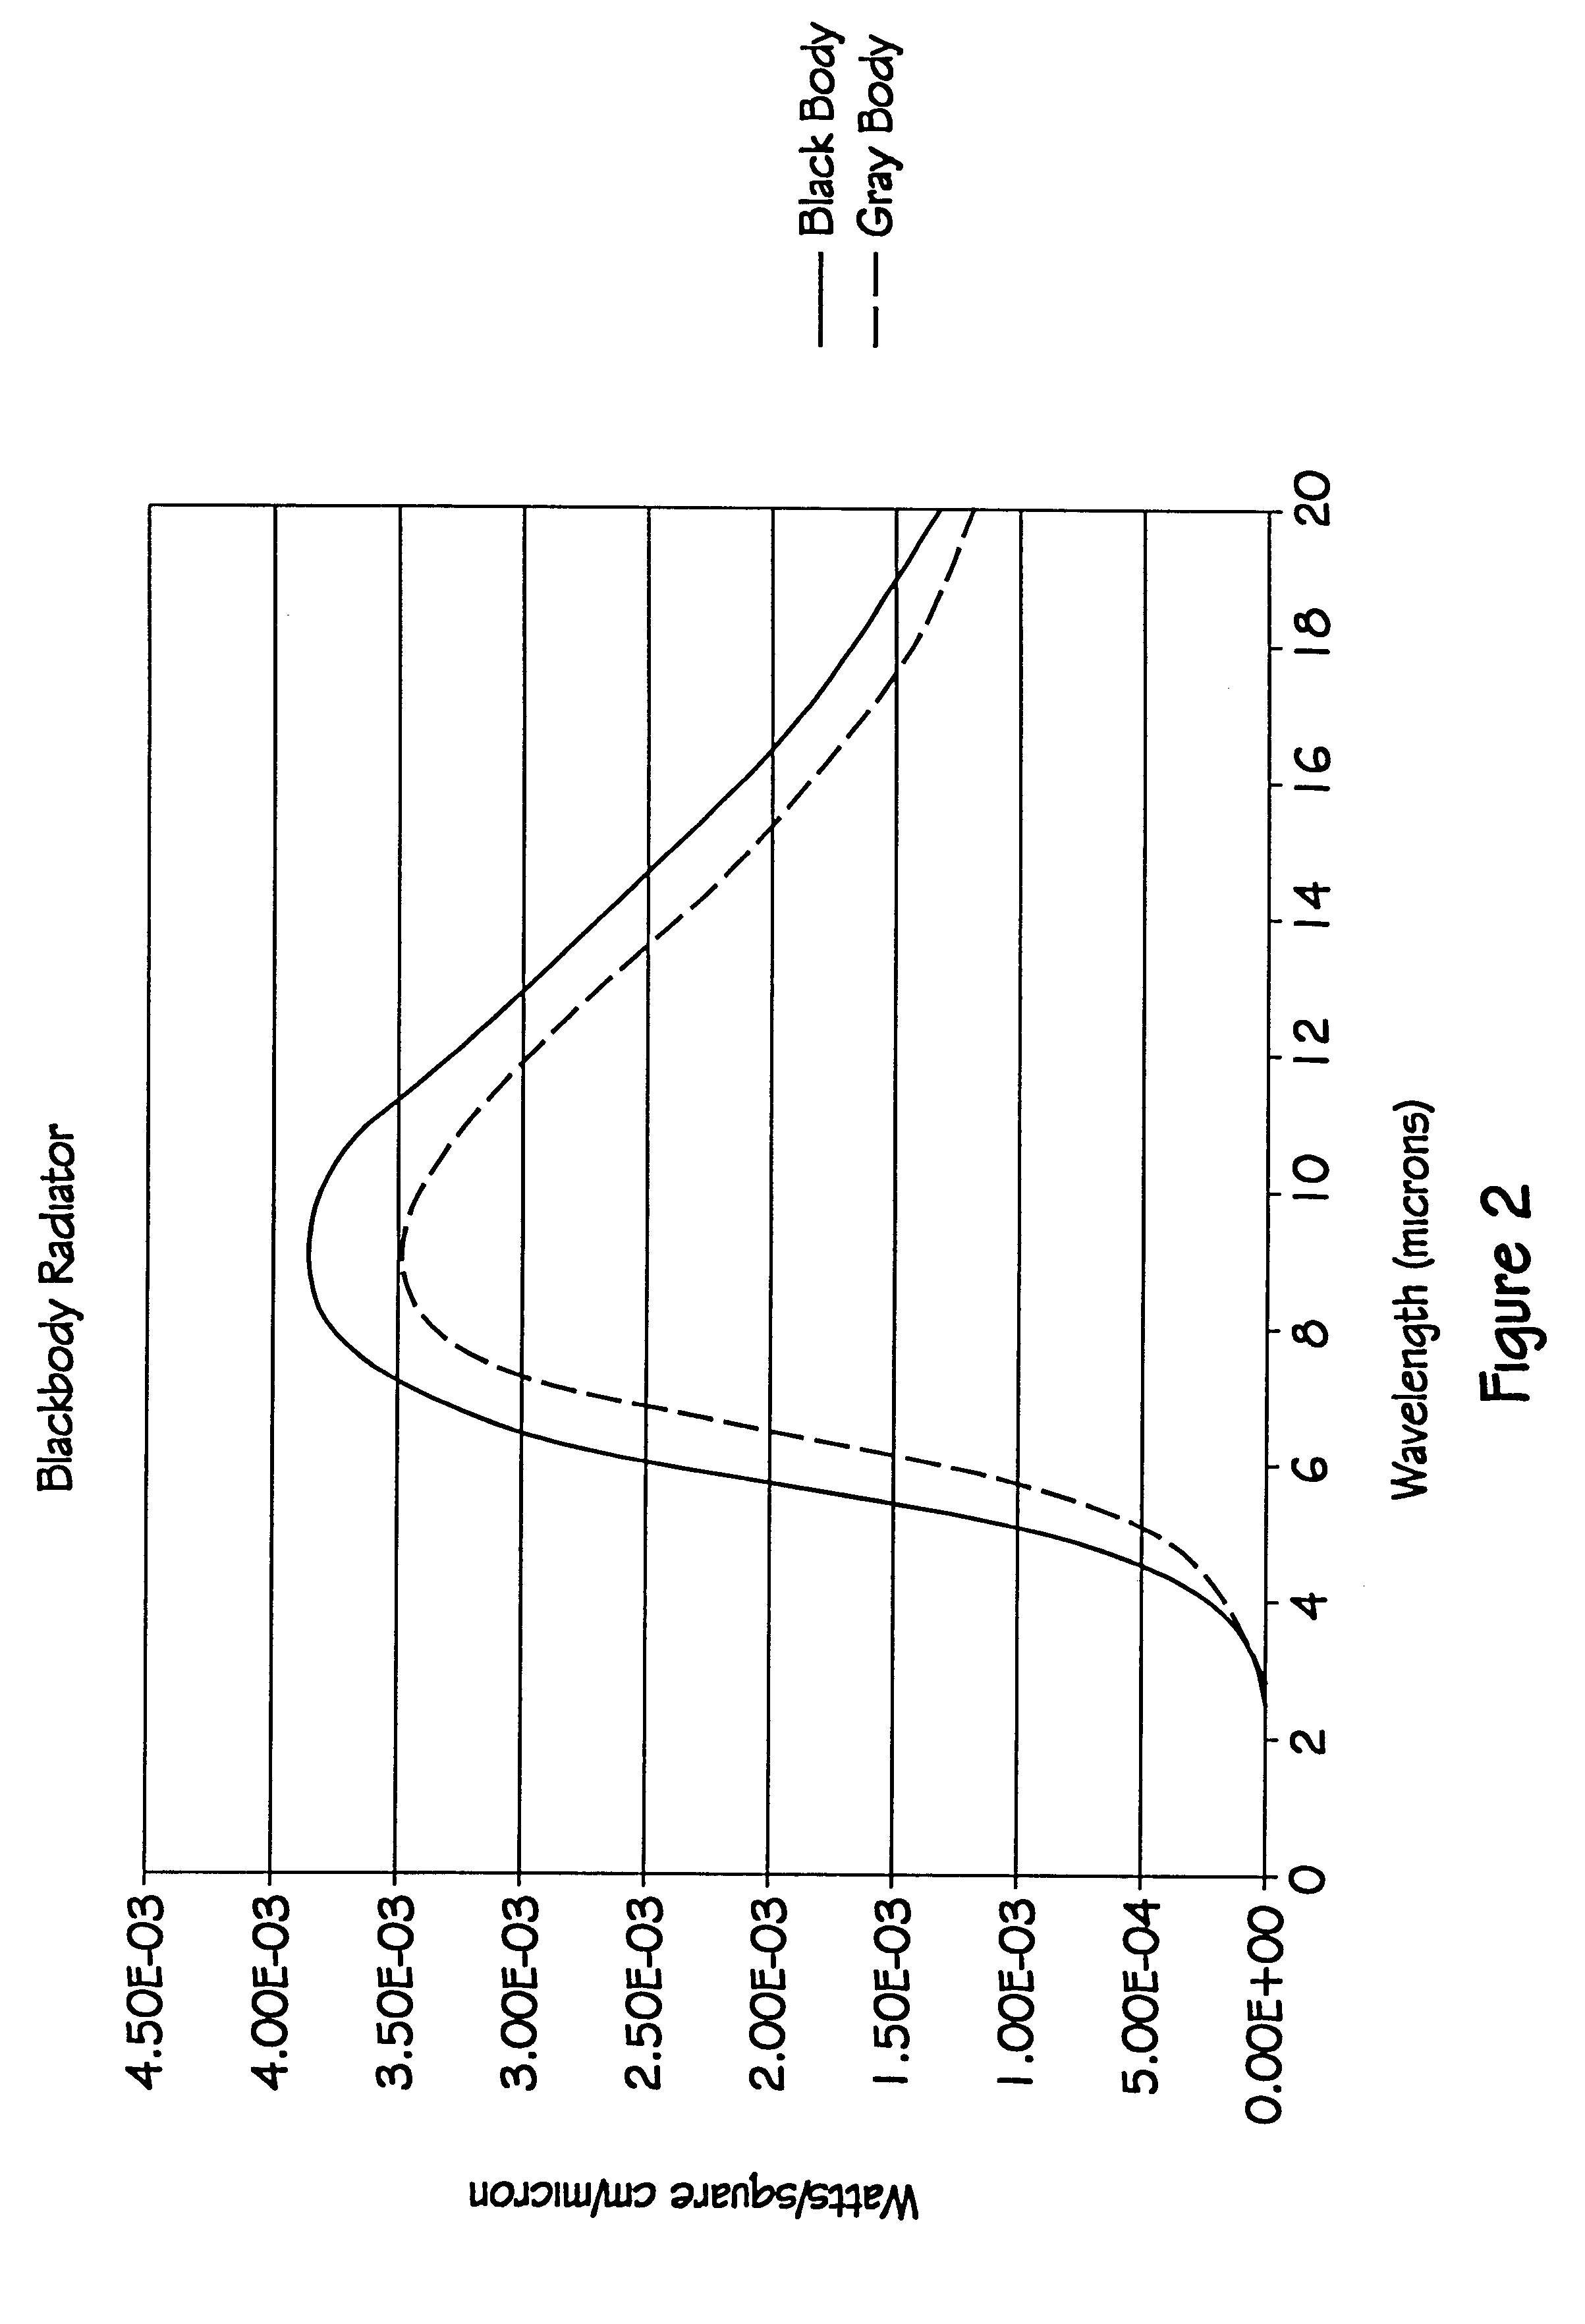 Method for determining analyte concentration using periodic temperature modulation and phase detection